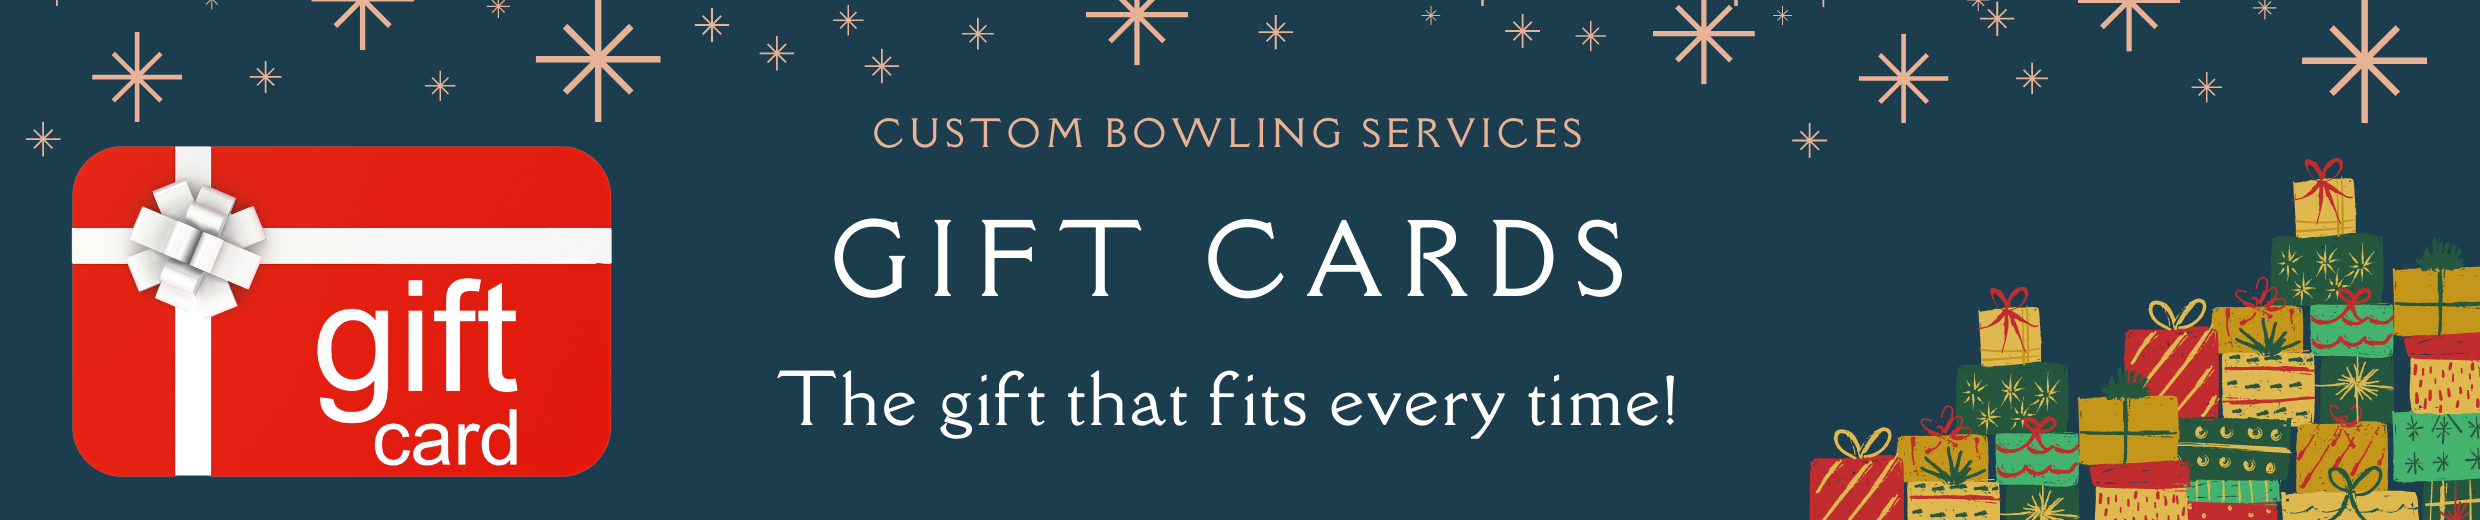 CBS - gift cards banner